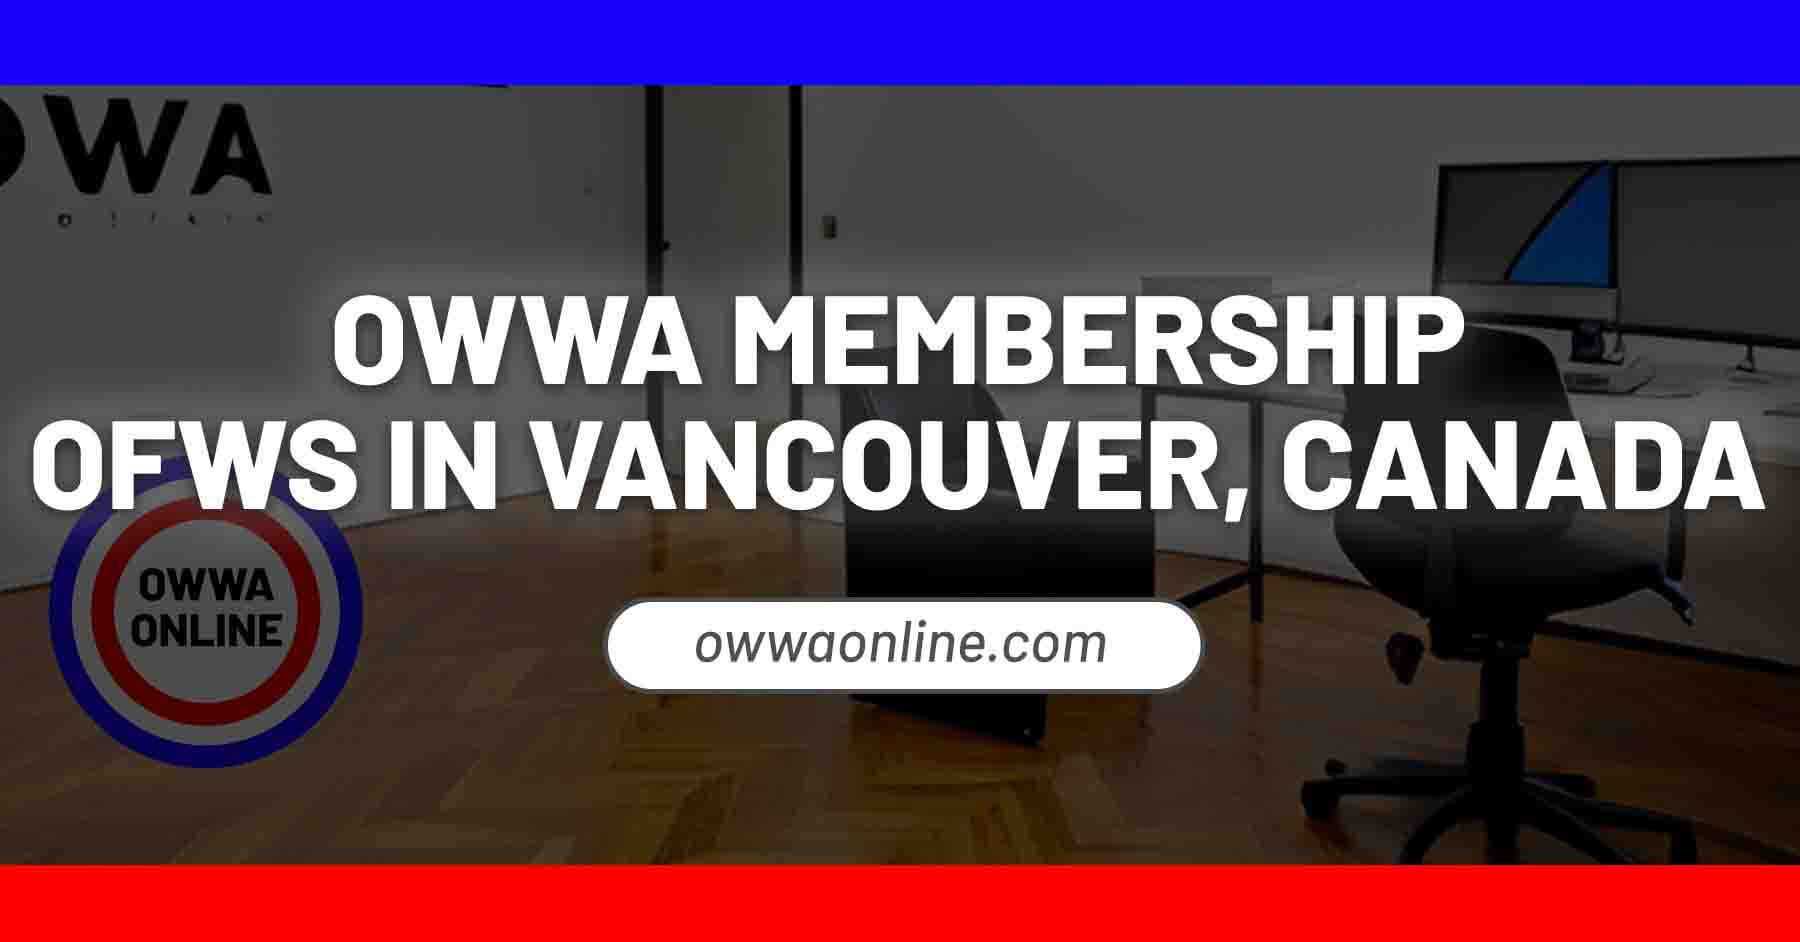 owwa appointment vancouver canada renewal application